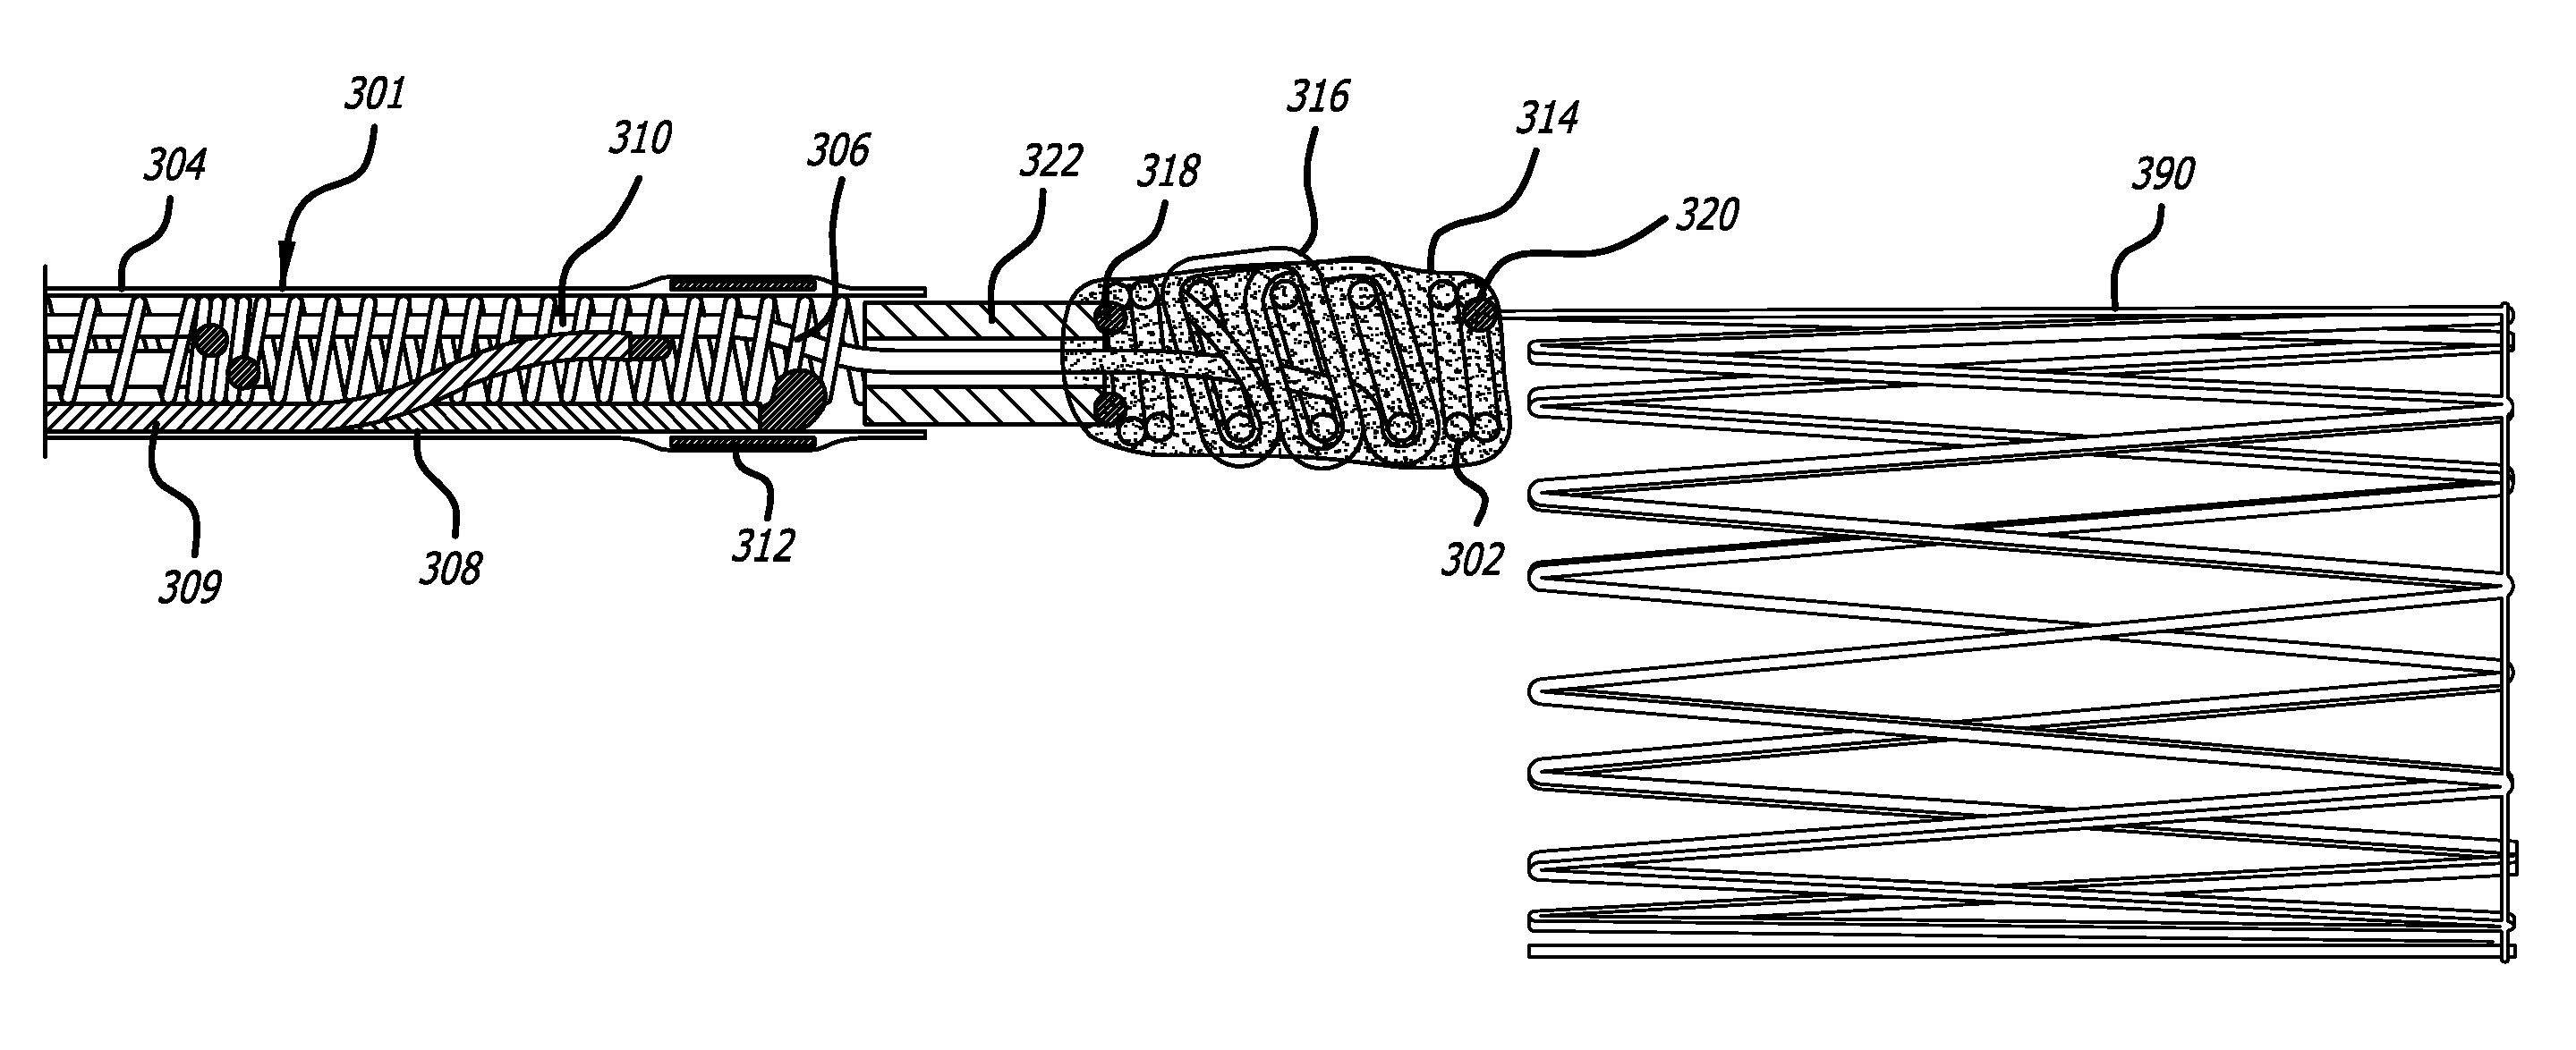 Implant Delivery System